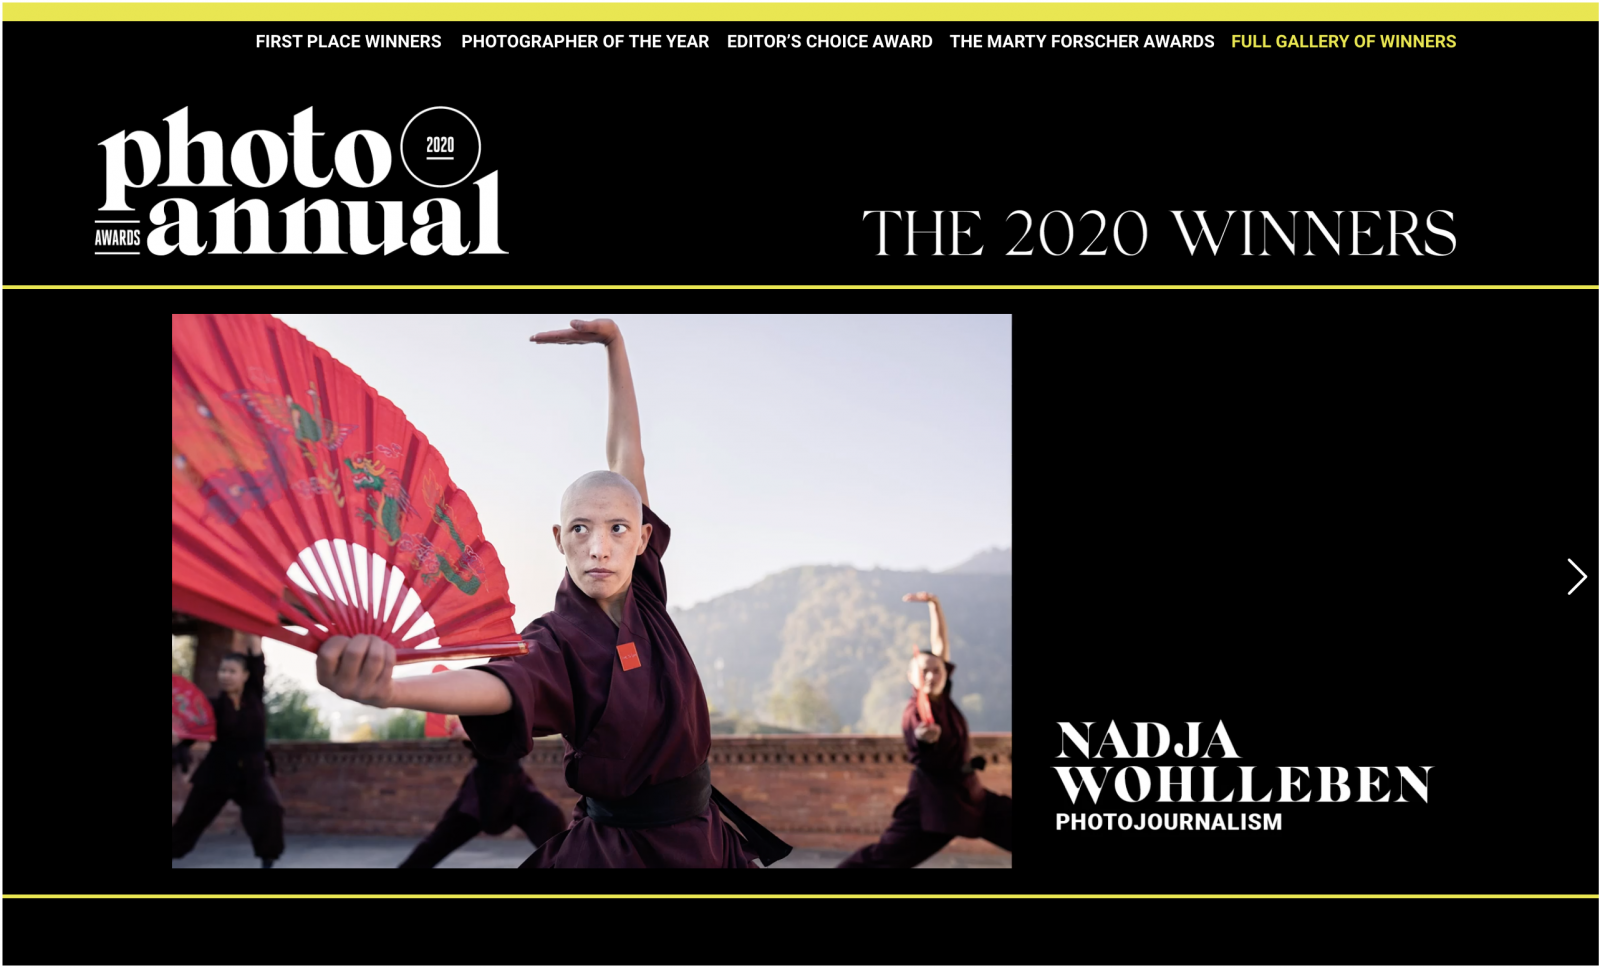 Thumbnail of Winner at The Photo Annual Awards 2020 (formerly PDN) in the photojournalism category with my ongoing project "˜THE KUNG FU NUNS OF THE HIMALAYAS'